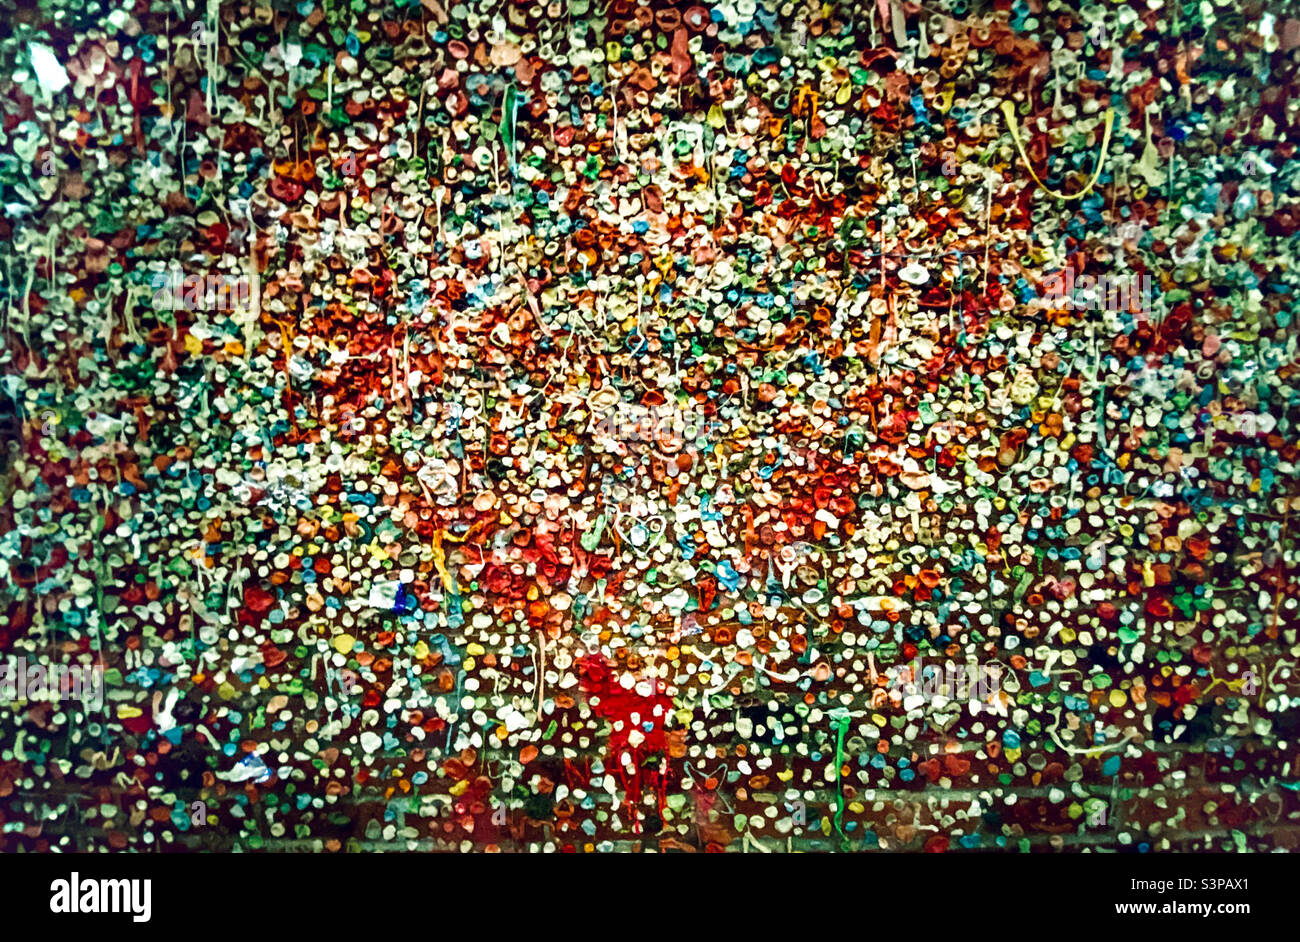 Gum art in the infamous and somewhat unsanitary Gum Wall in Seattle’s Pike Place Market Stock Photo